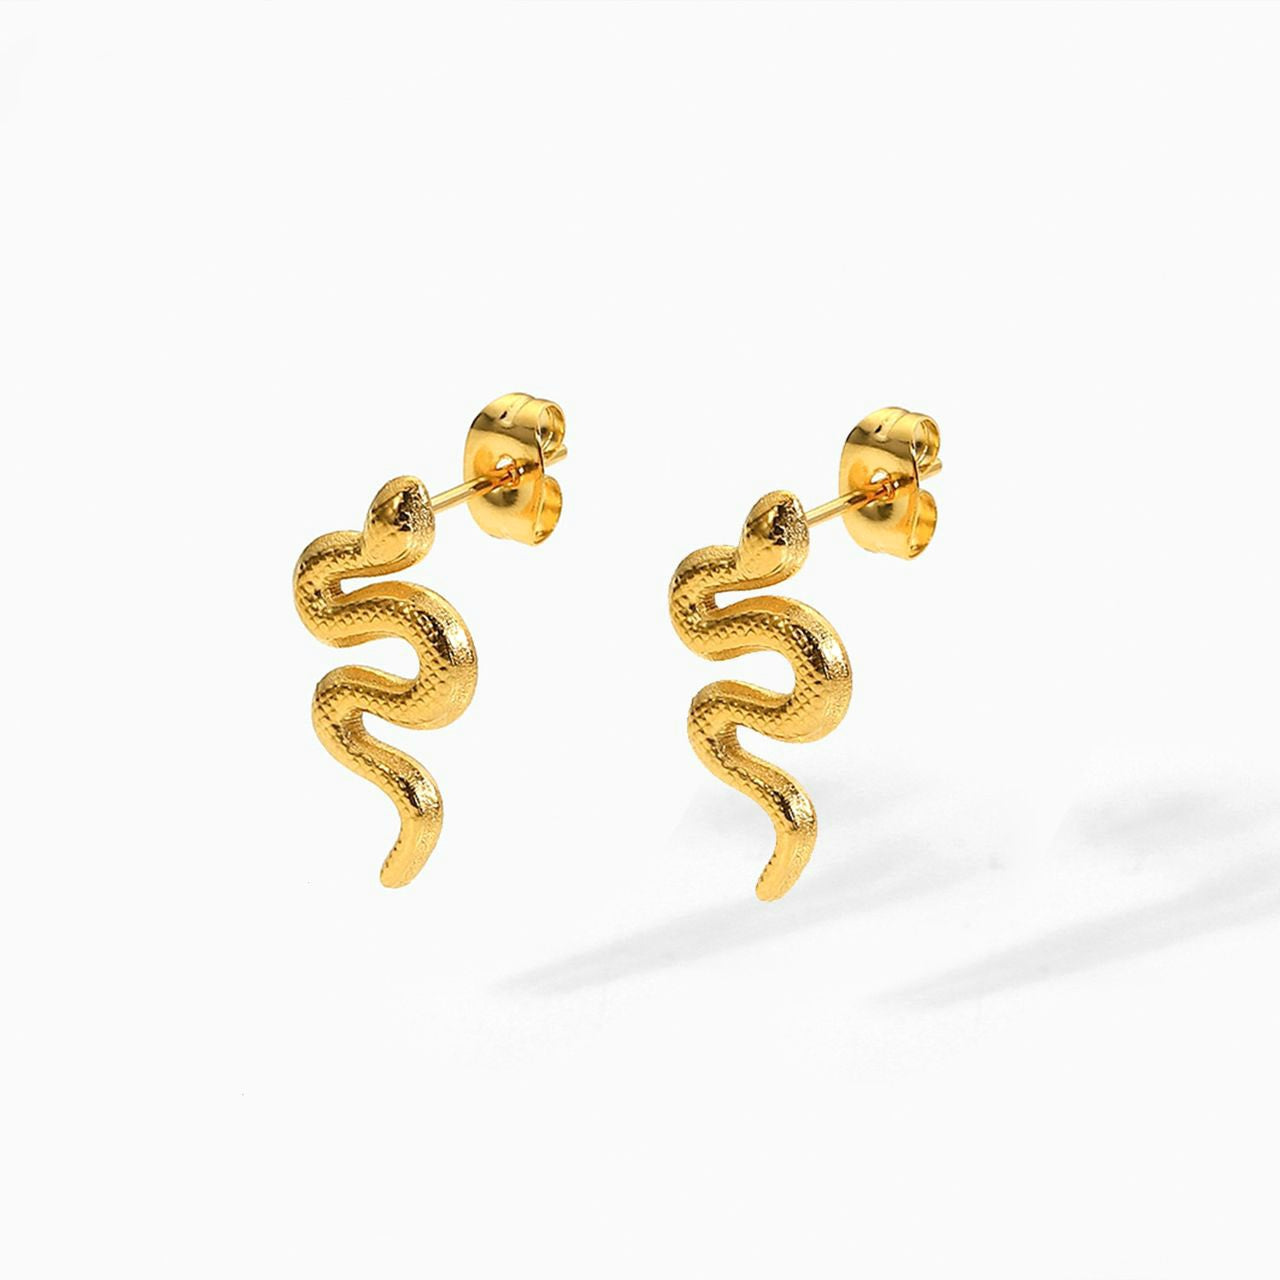 Tiny Snake Earrings - Gold Plated